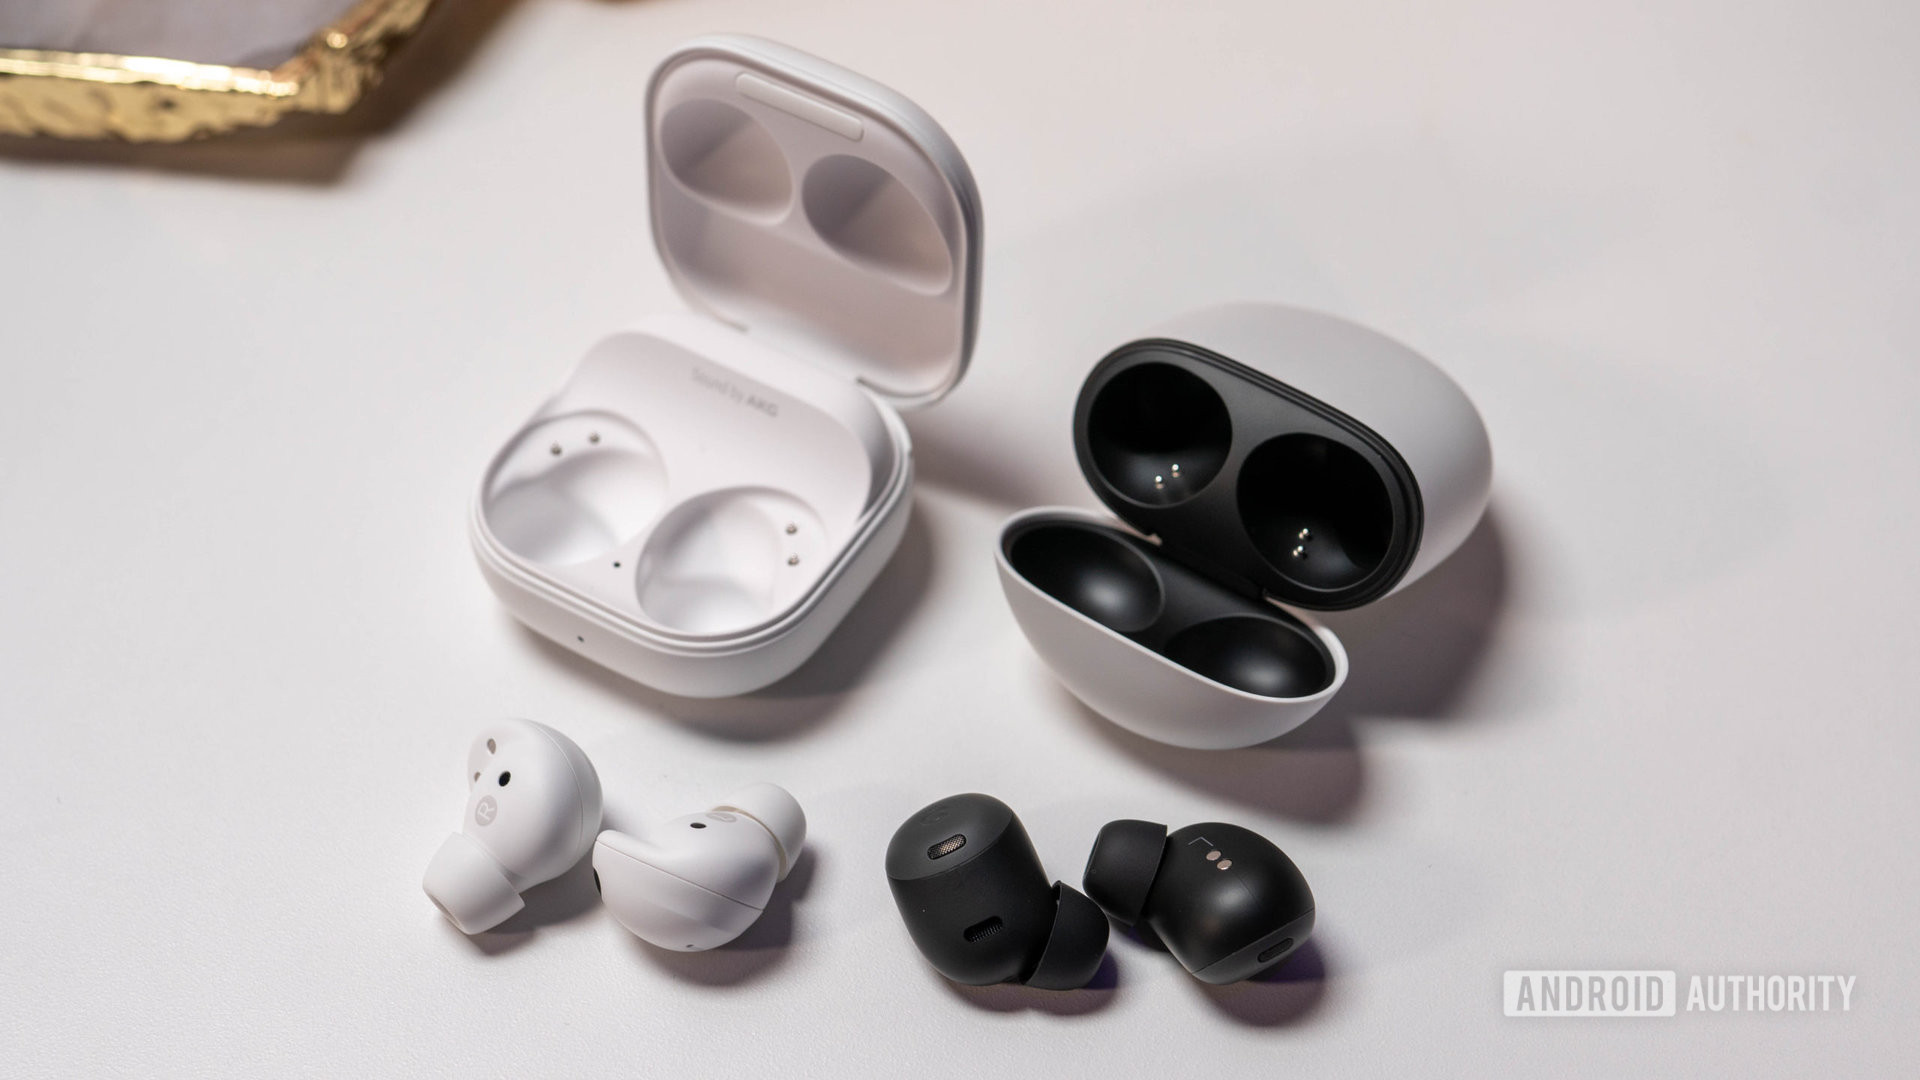 Samsung Galaxy Buds 2 Pro vs Google Pixel Buds Pro: Which are